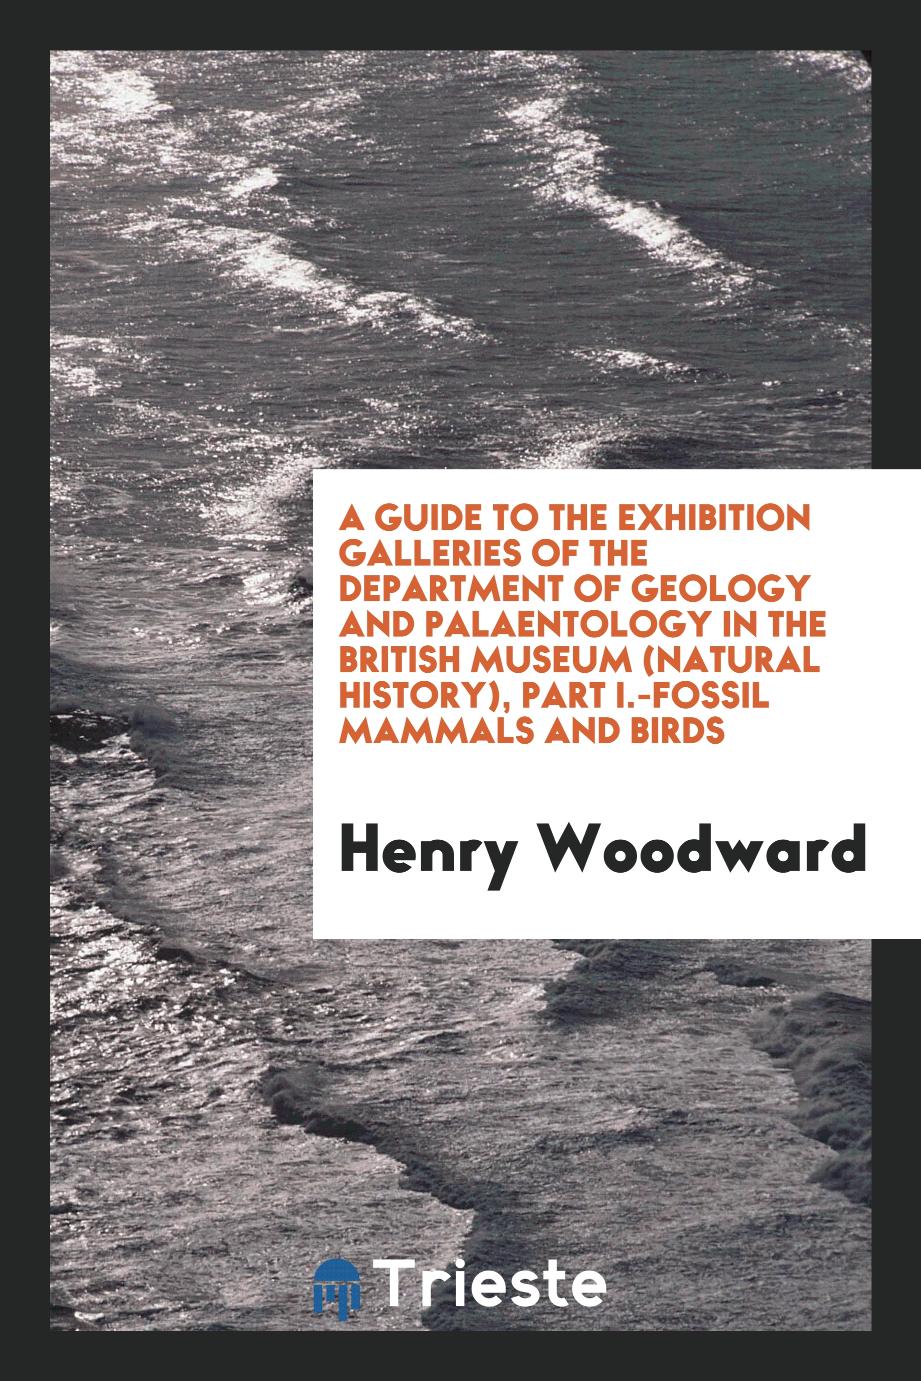 A Guide to the Exhibition Galleries of the Department of Geology and Palaentology in the British Museum (Natural History), Part I.-Fossil Mammals and Birds